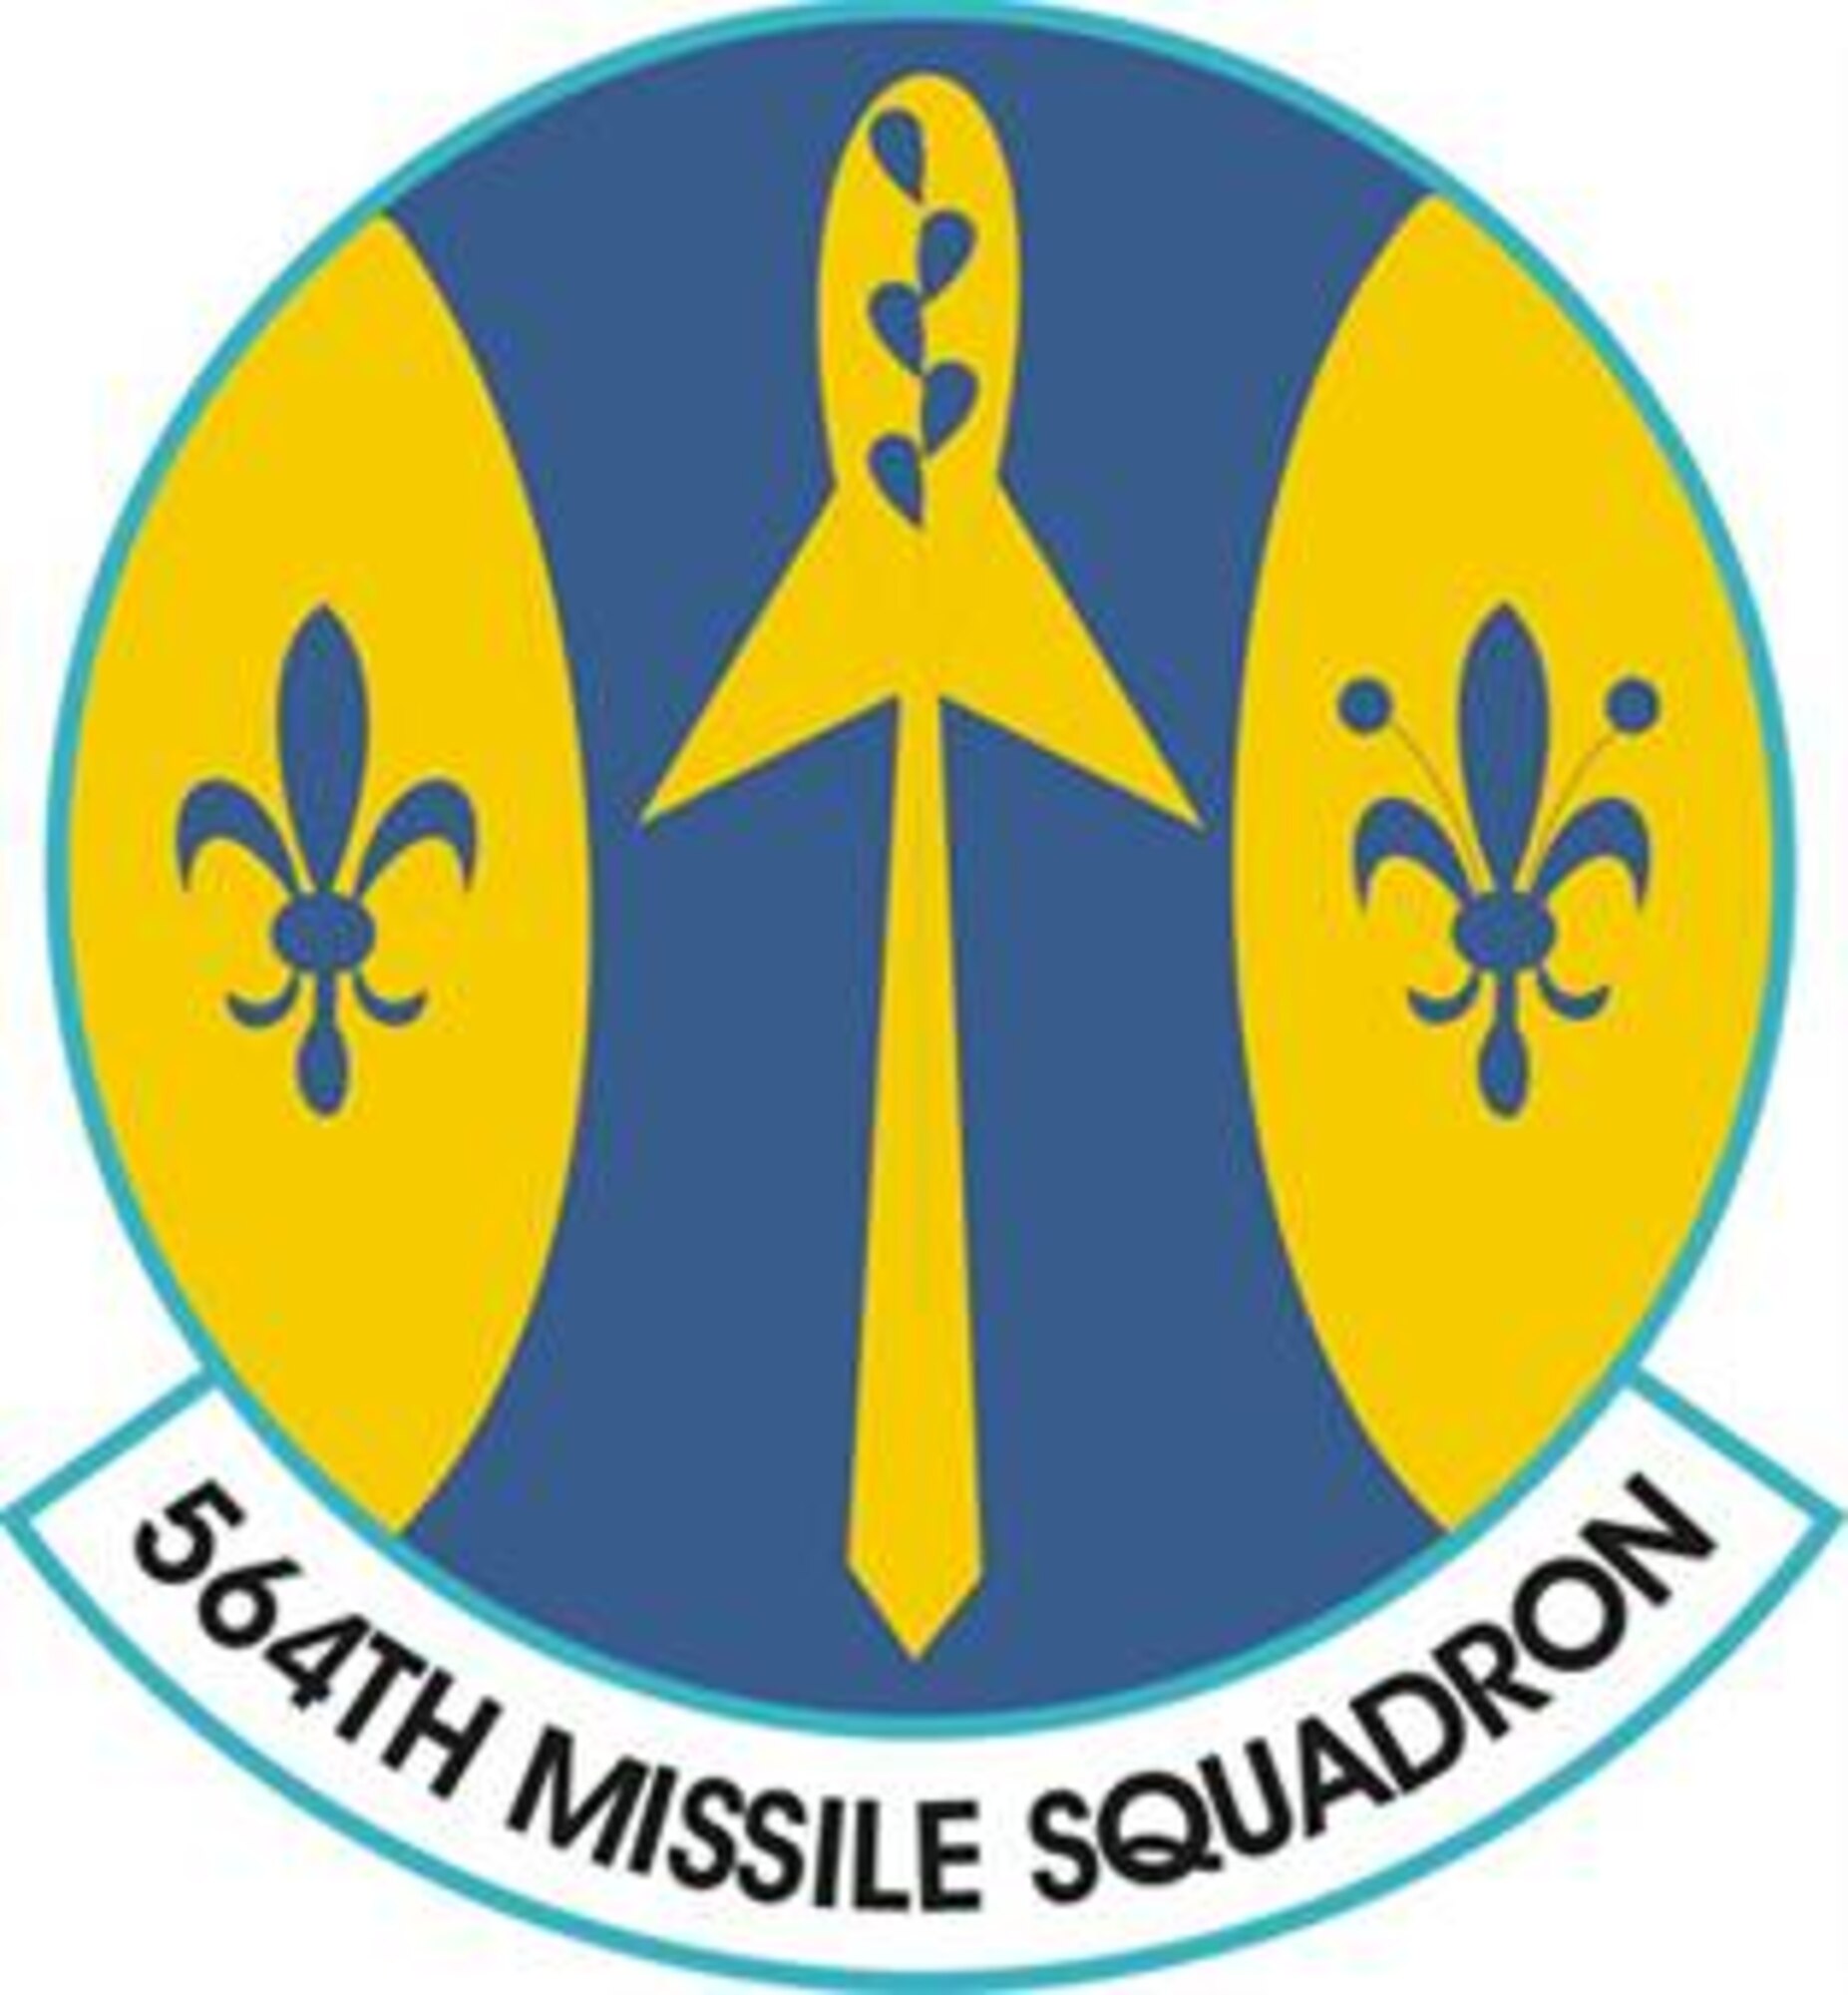 564th Missile Squadron patch